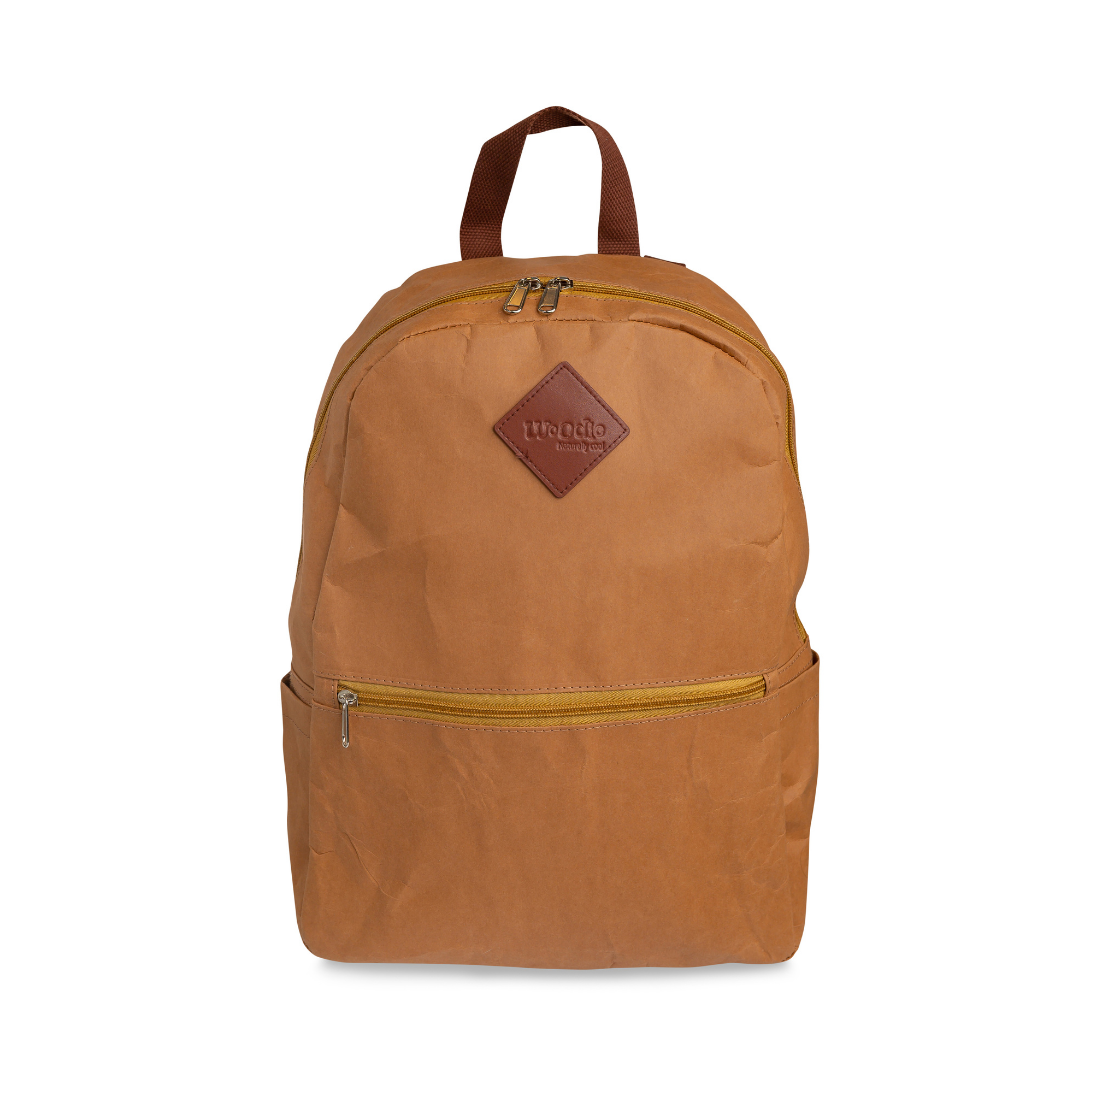 Ecological backpack from natural materials